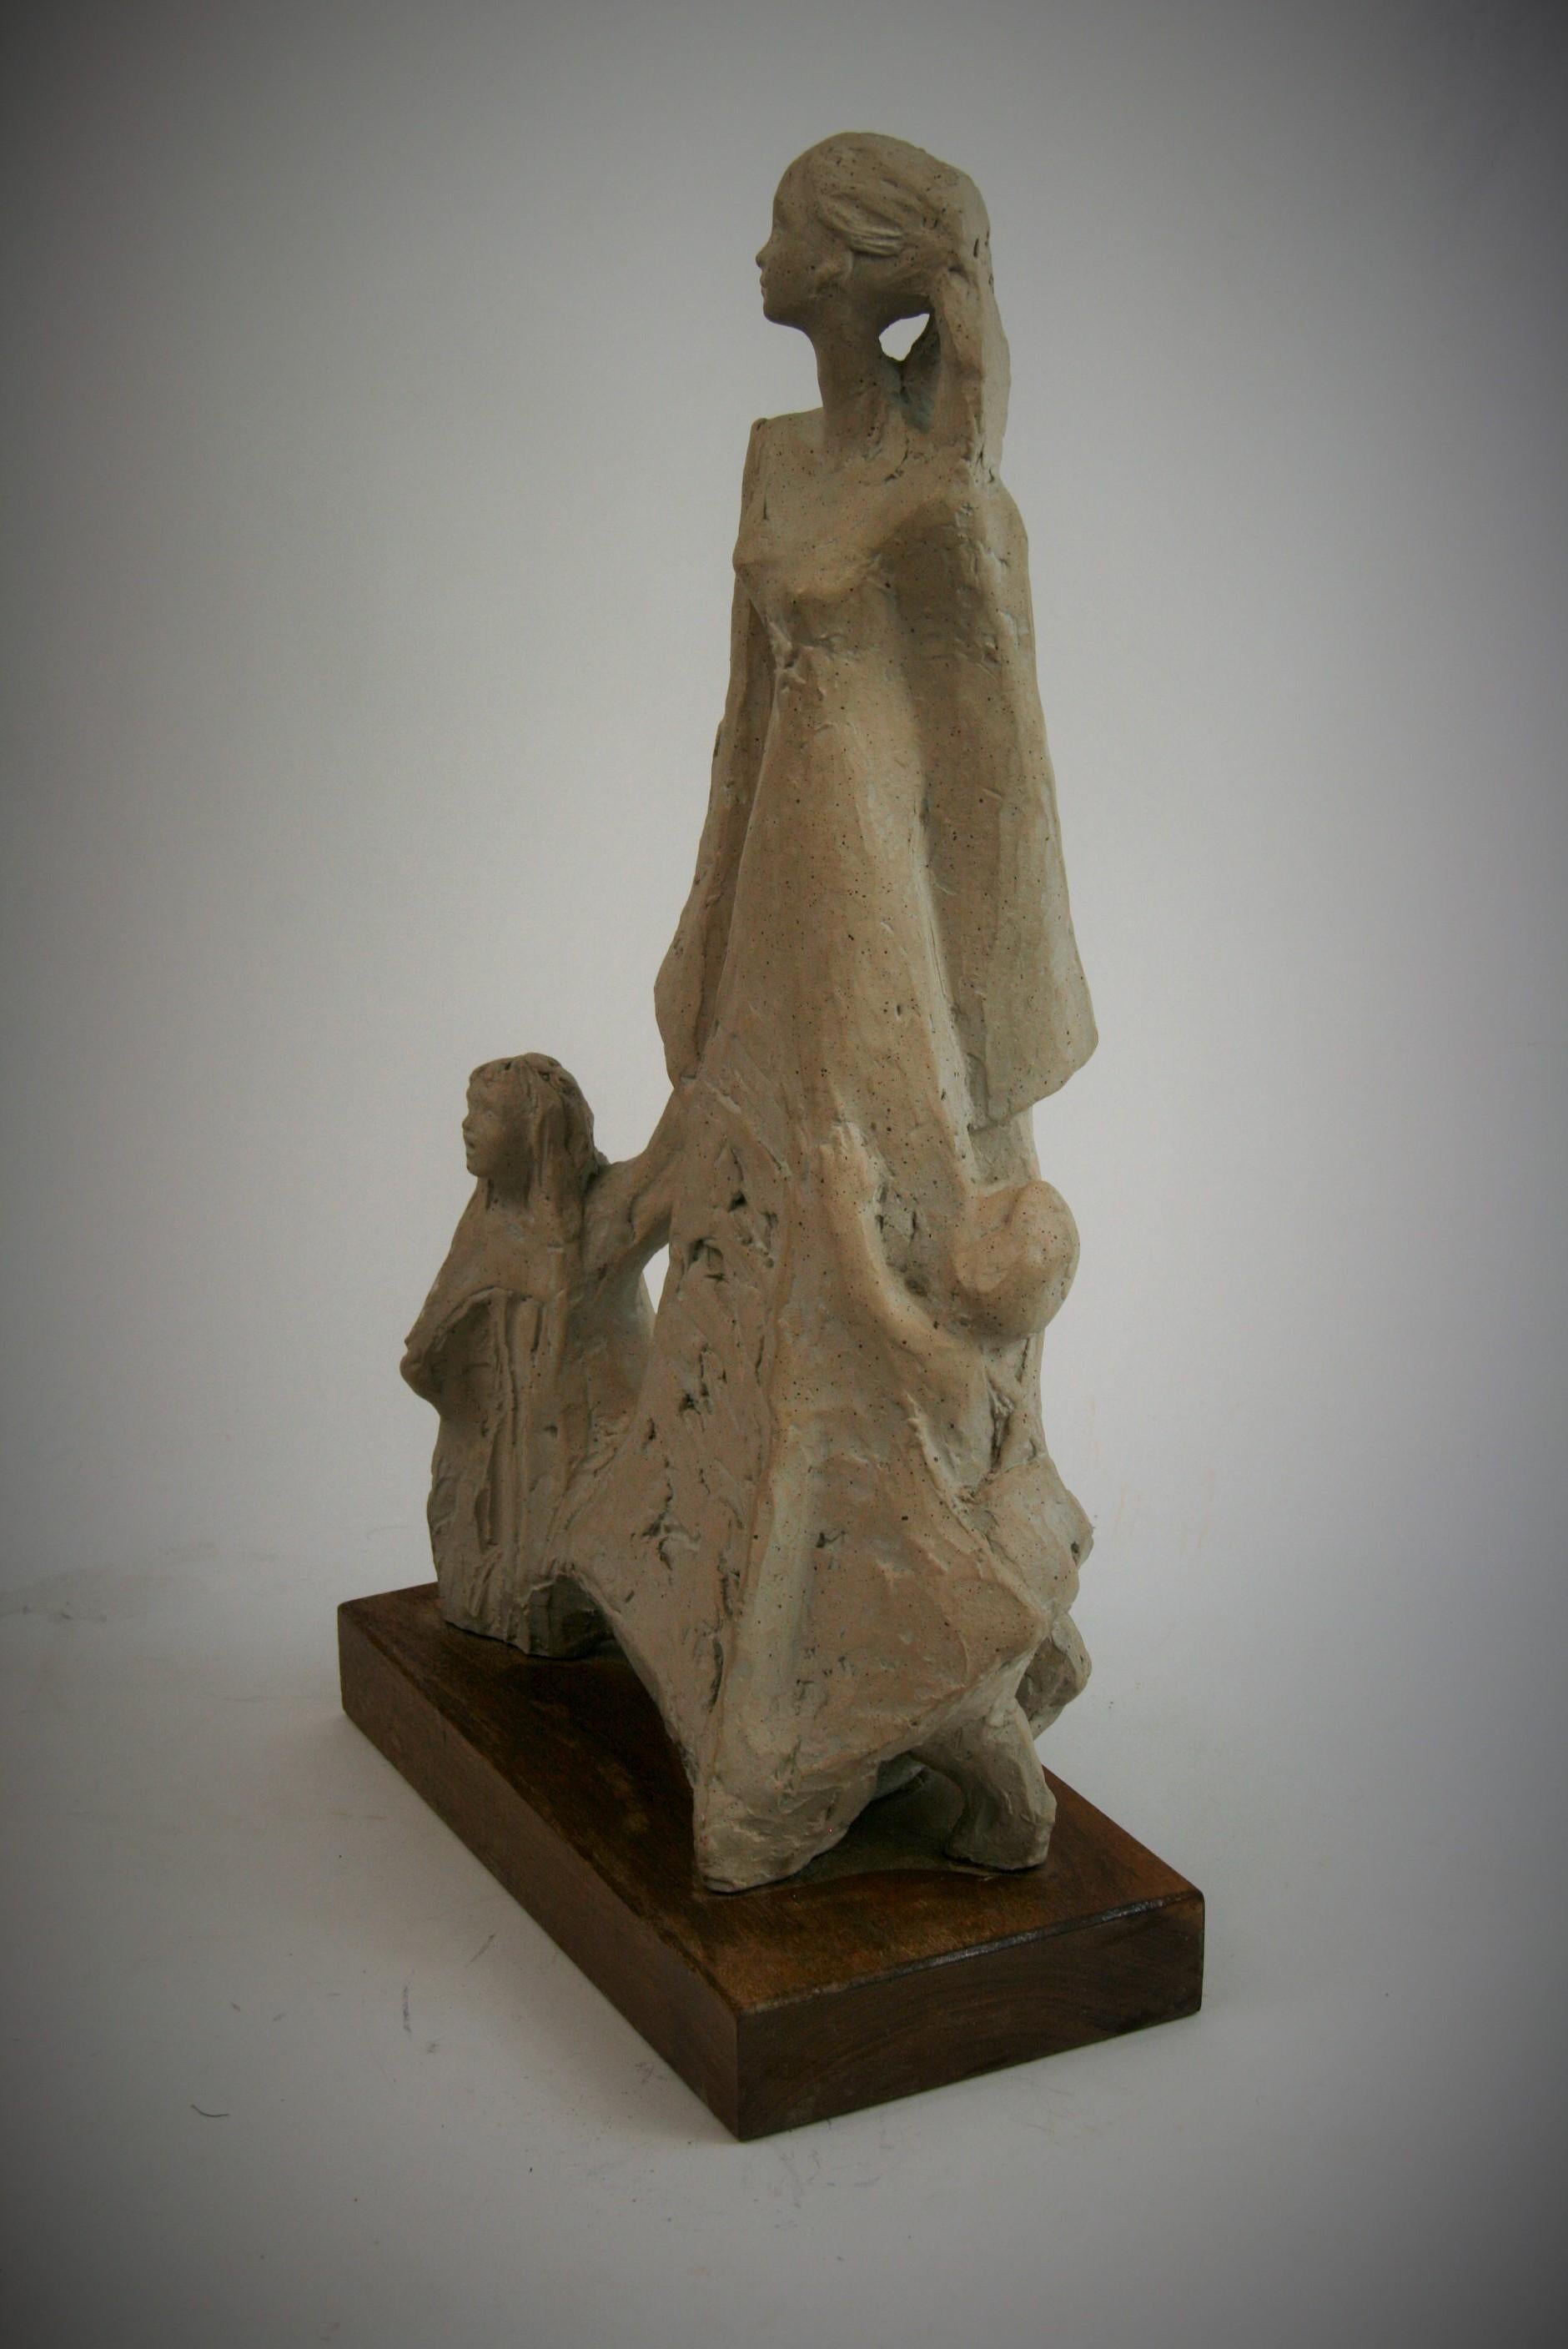 2-295 Mother with two small childred cast stone sculpture on solid walnut wood base
Produced by Austin Productions 1983